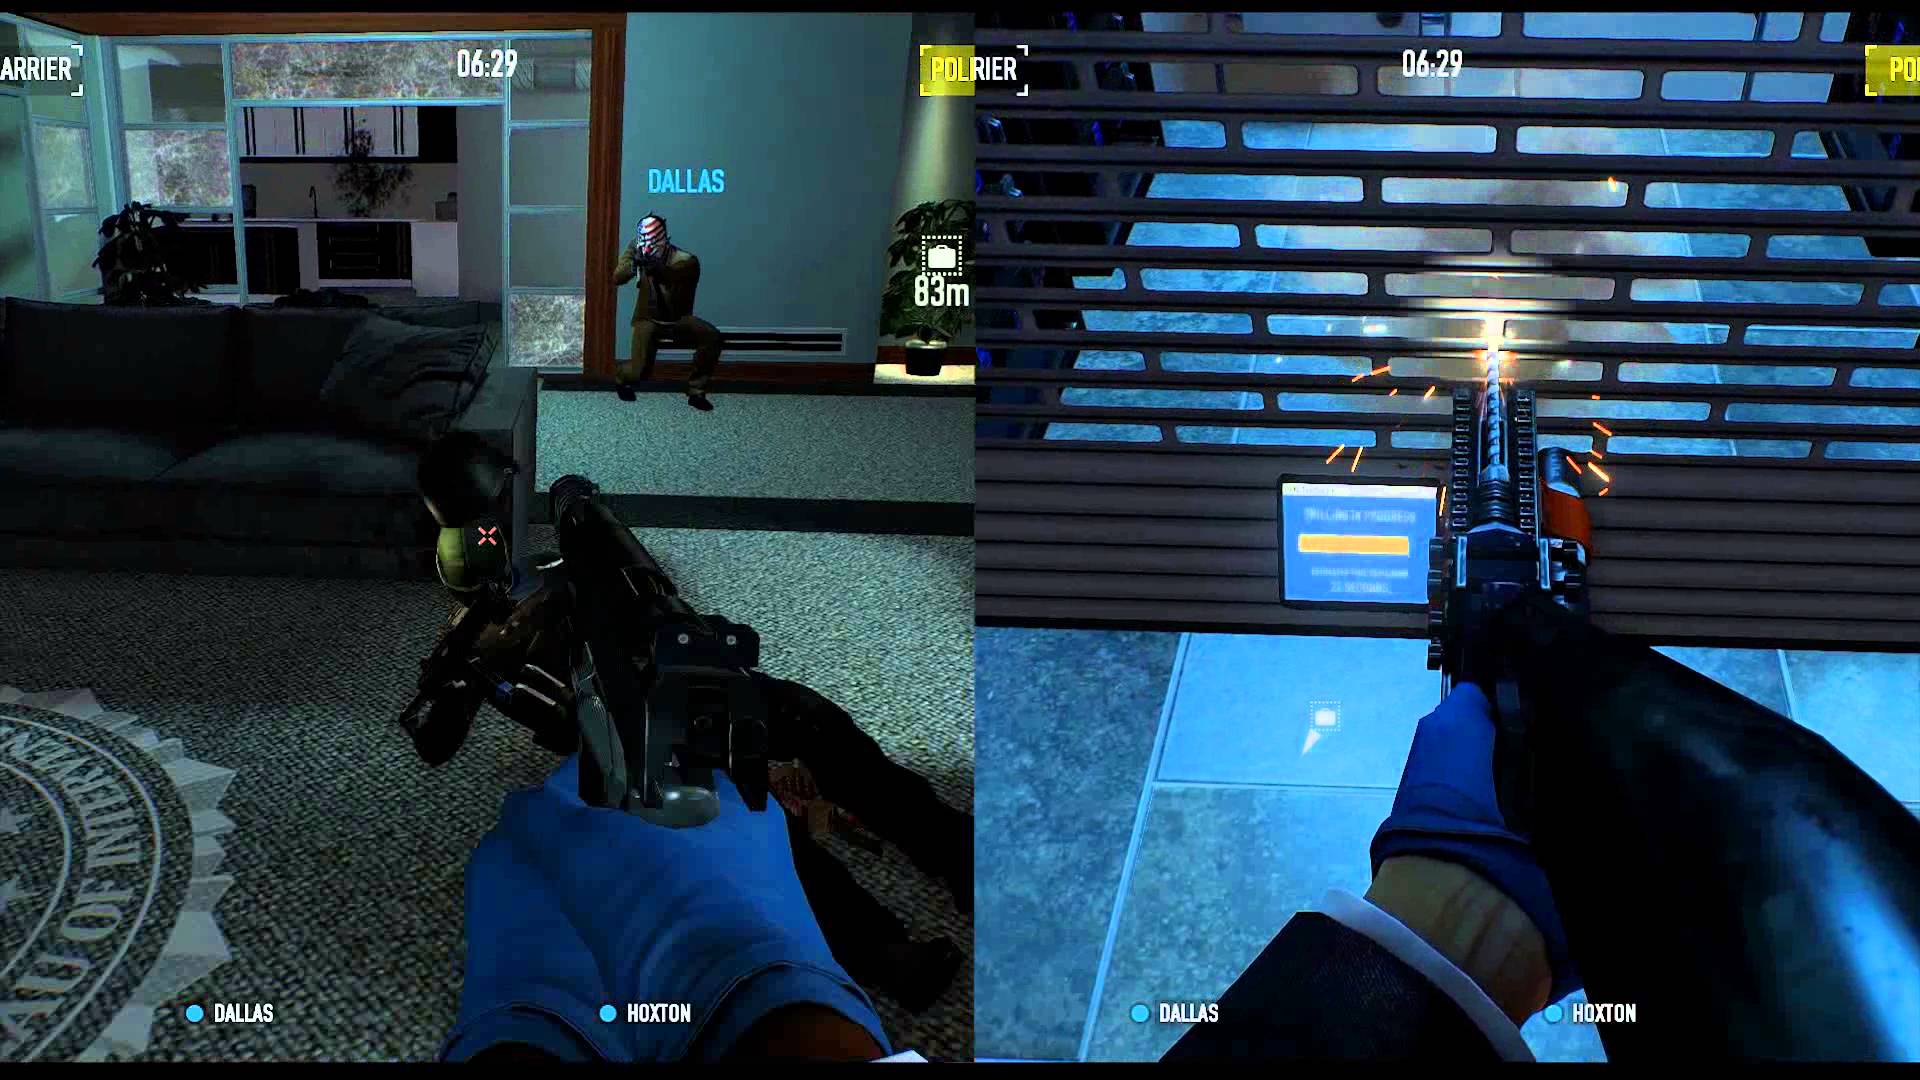 Ps4 split. Payday 2 сплит скрин. Payday 2 на ПС 3. Payday 2 Split Screen ps3. Payday 2 ps4.